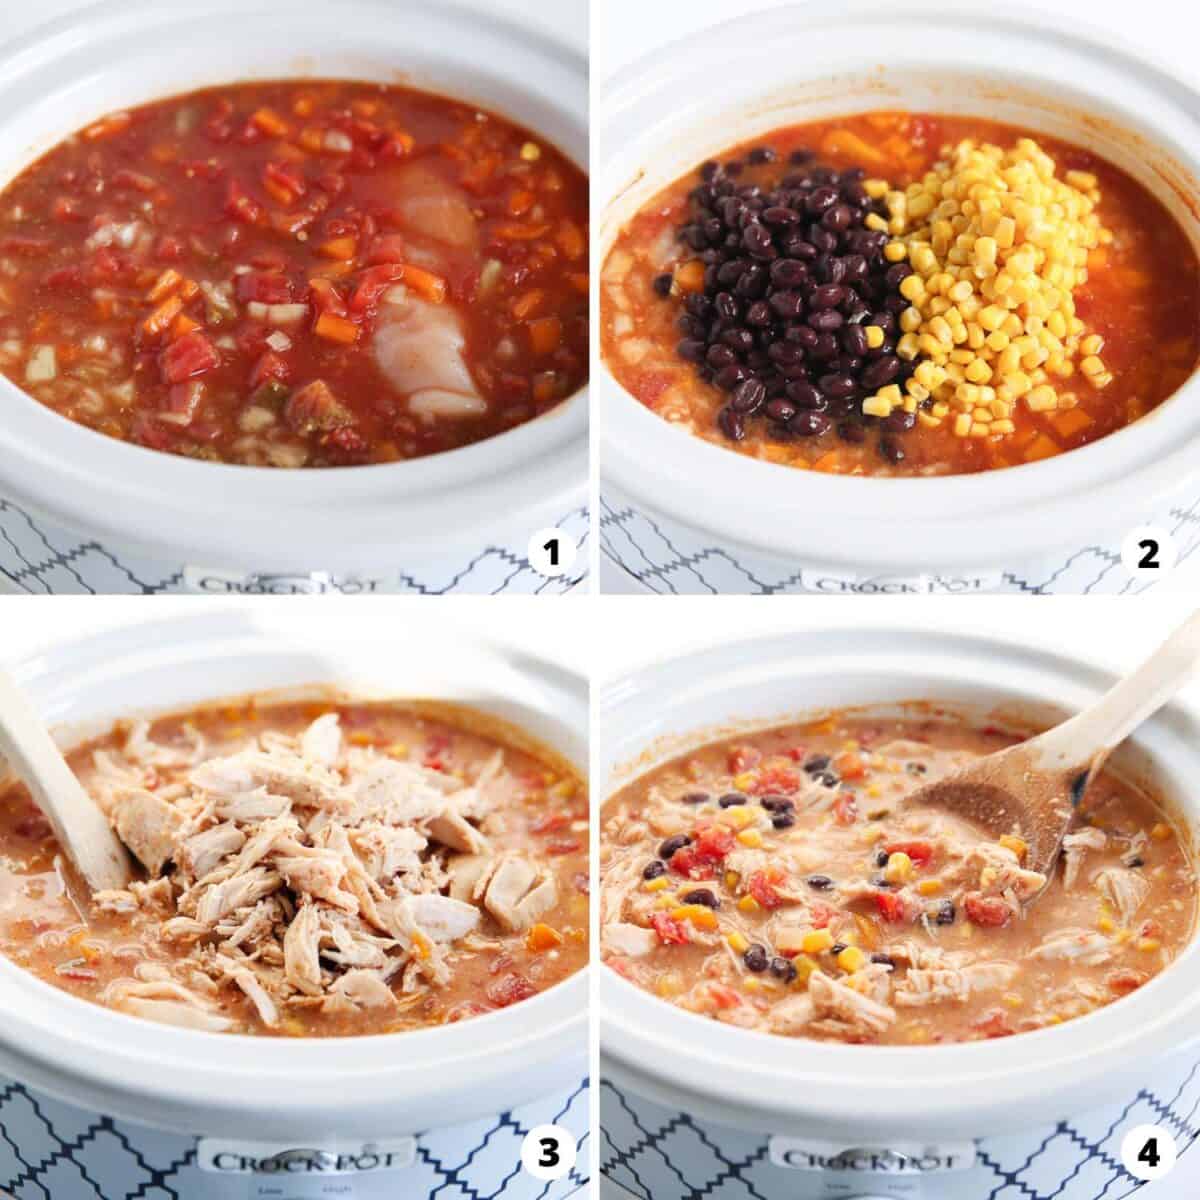 Showing how to make chicken enchilada soup in a 4 step collage.